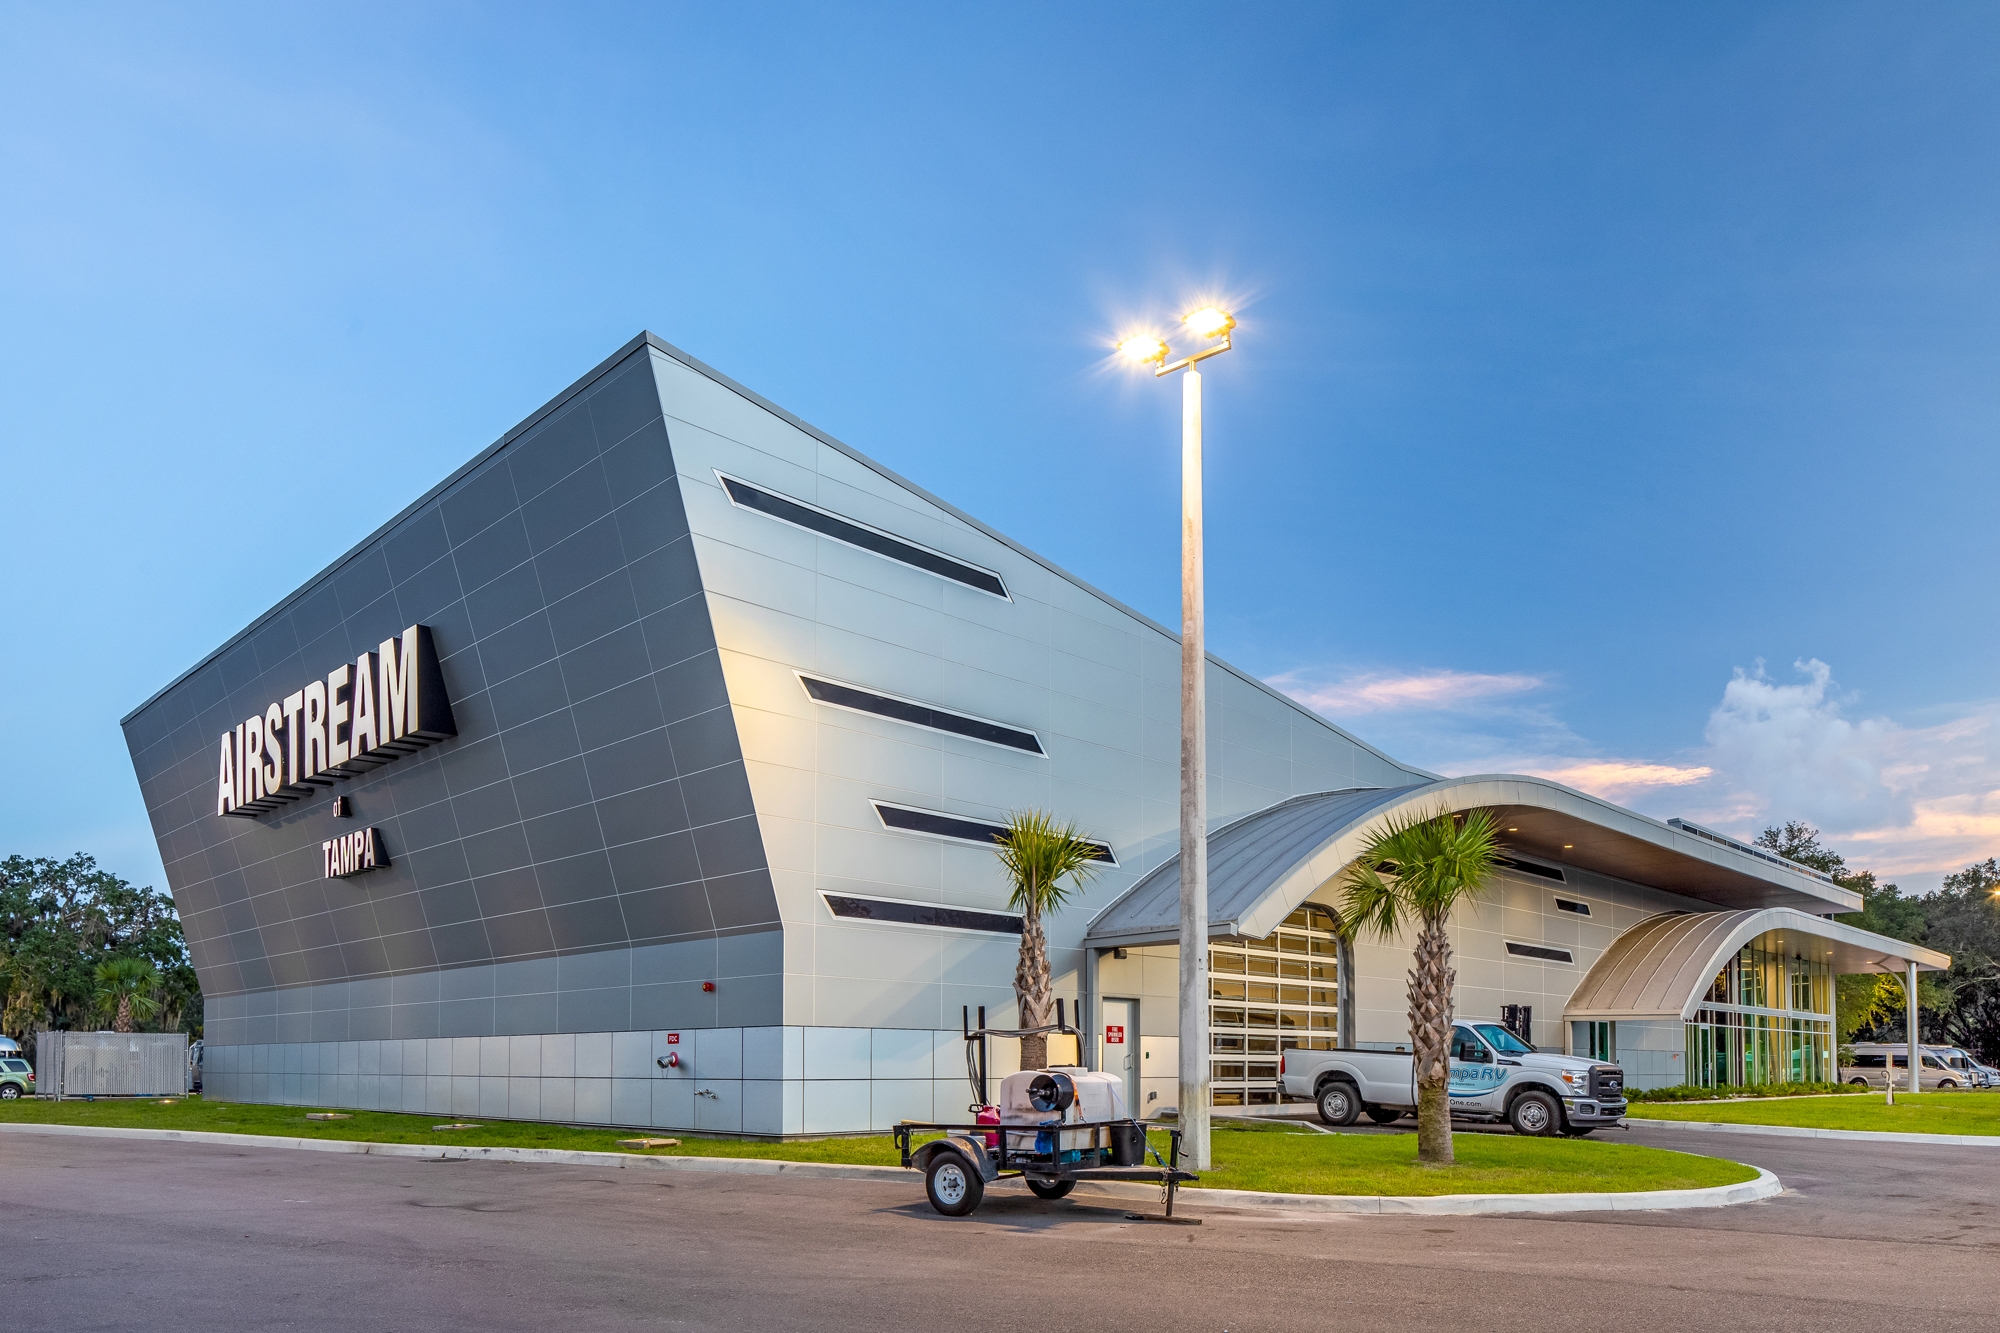 Airstream of Tampa | Dover, FL | Retail Architects, Engineers & Designers | Cuhaci Peterson 1